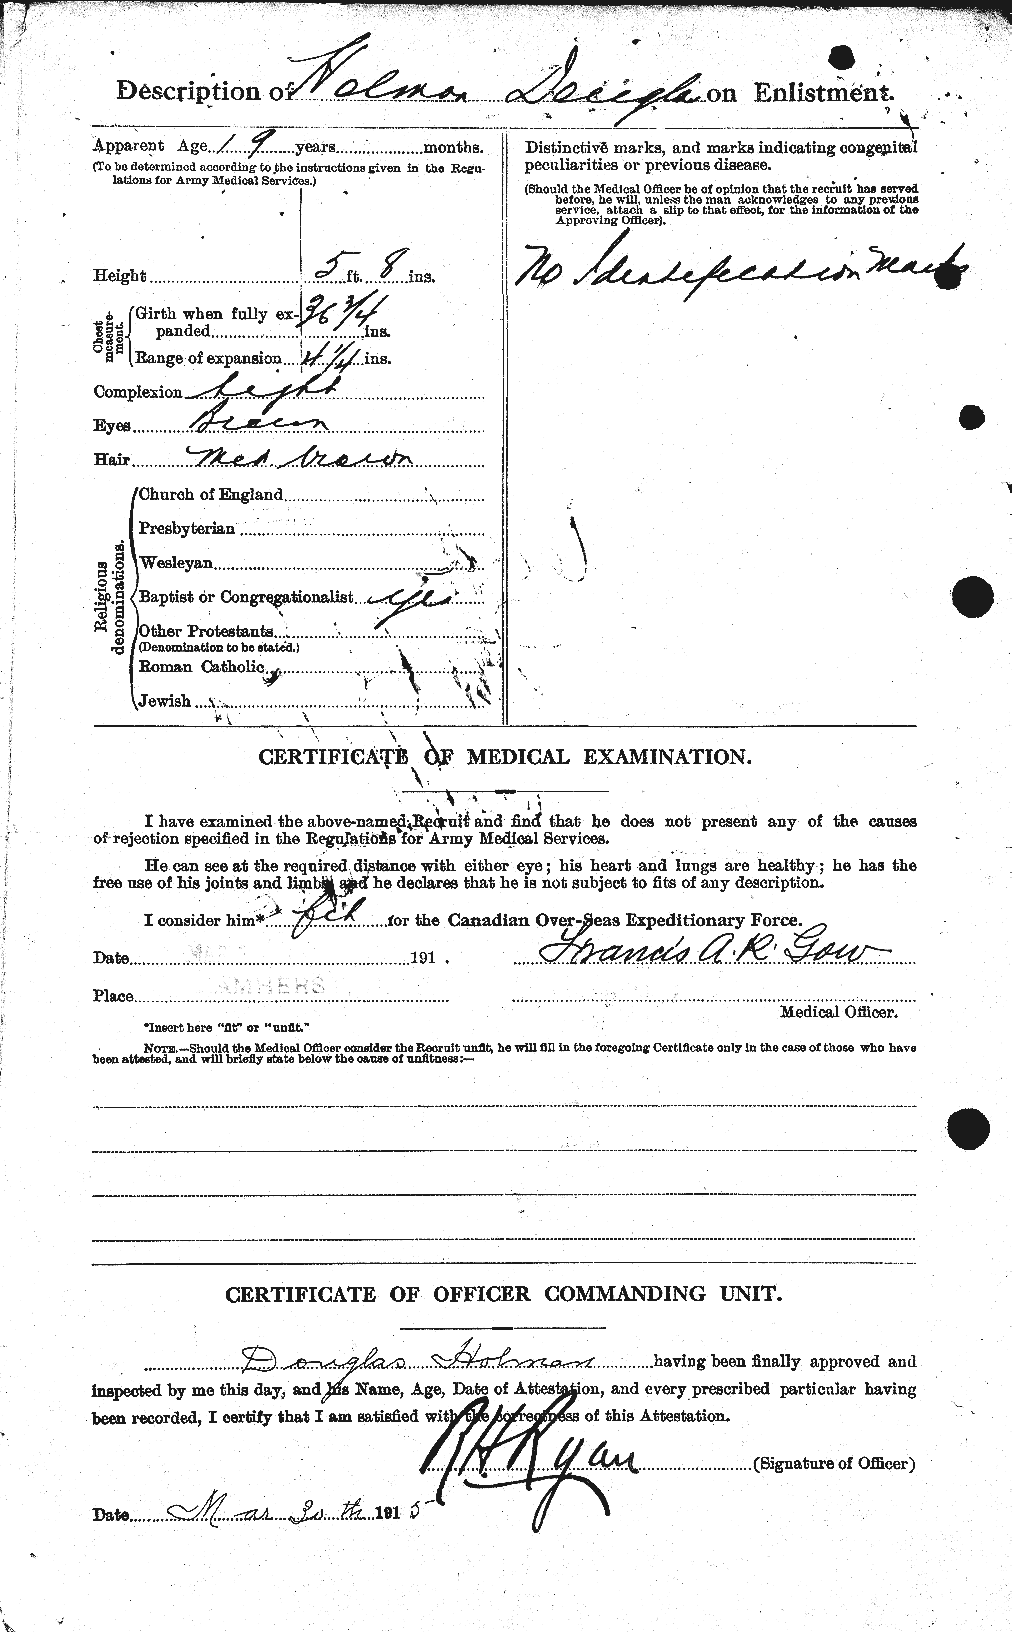 Personnel Records of the First World War - CEF 400212b